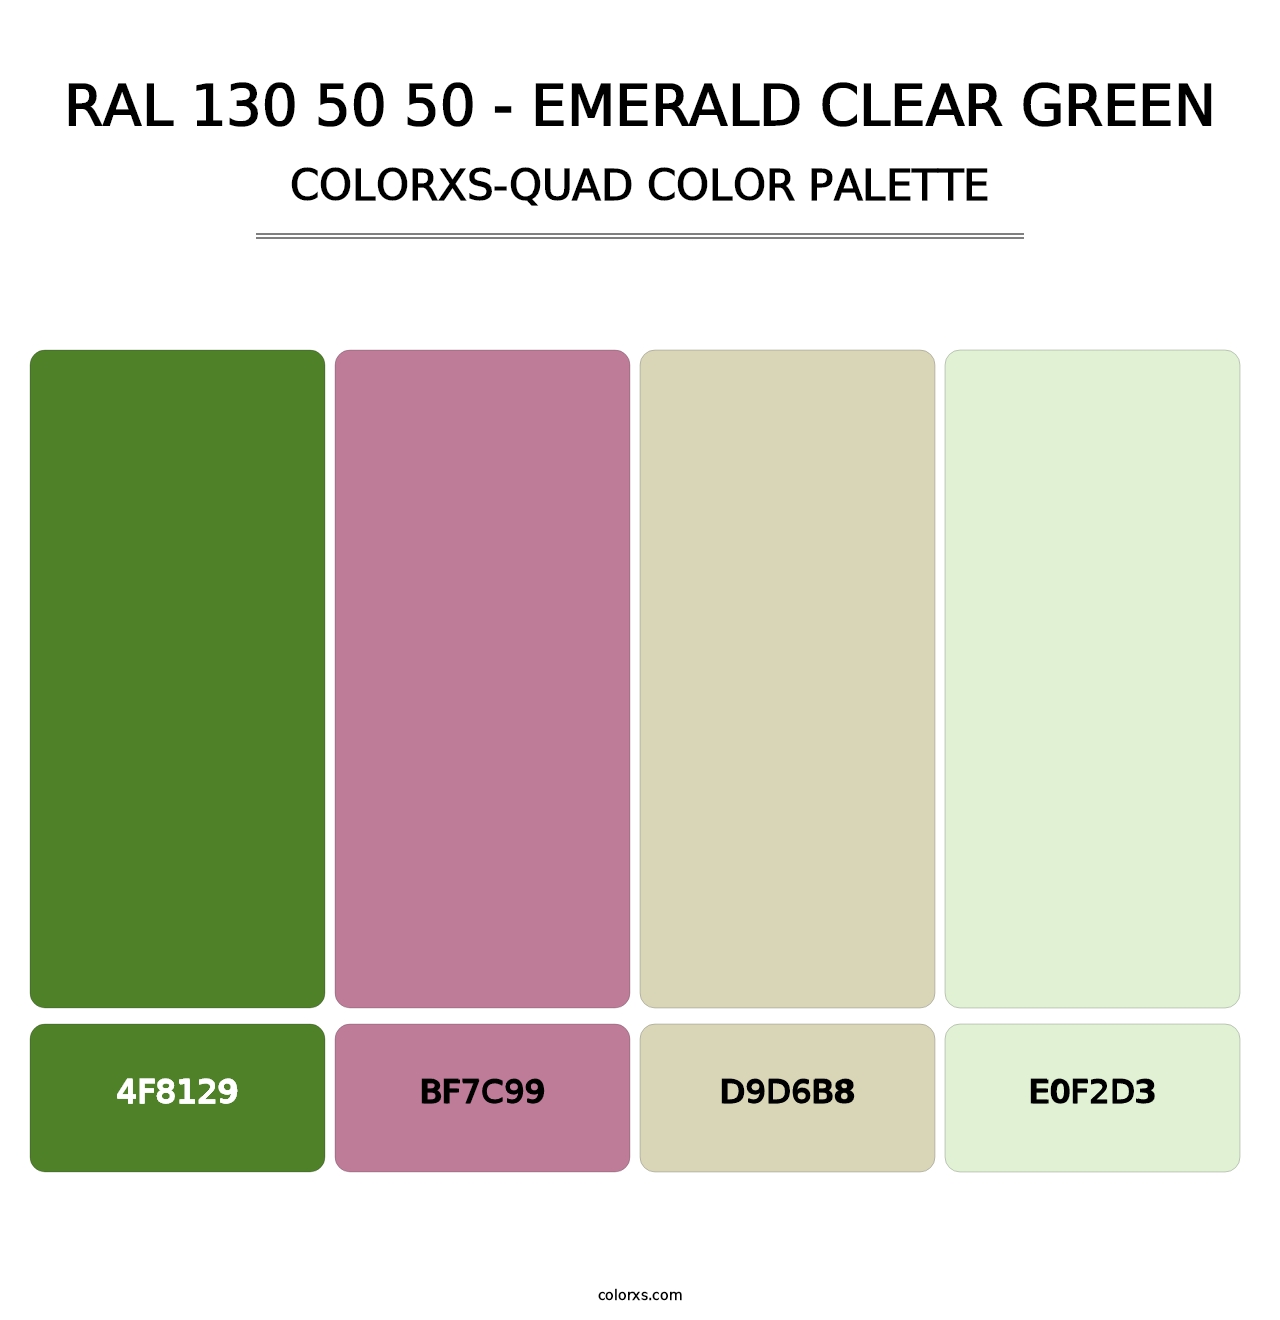 RAL 130 50 50 - Emerald Clear Green - Colorxs Quad Palette